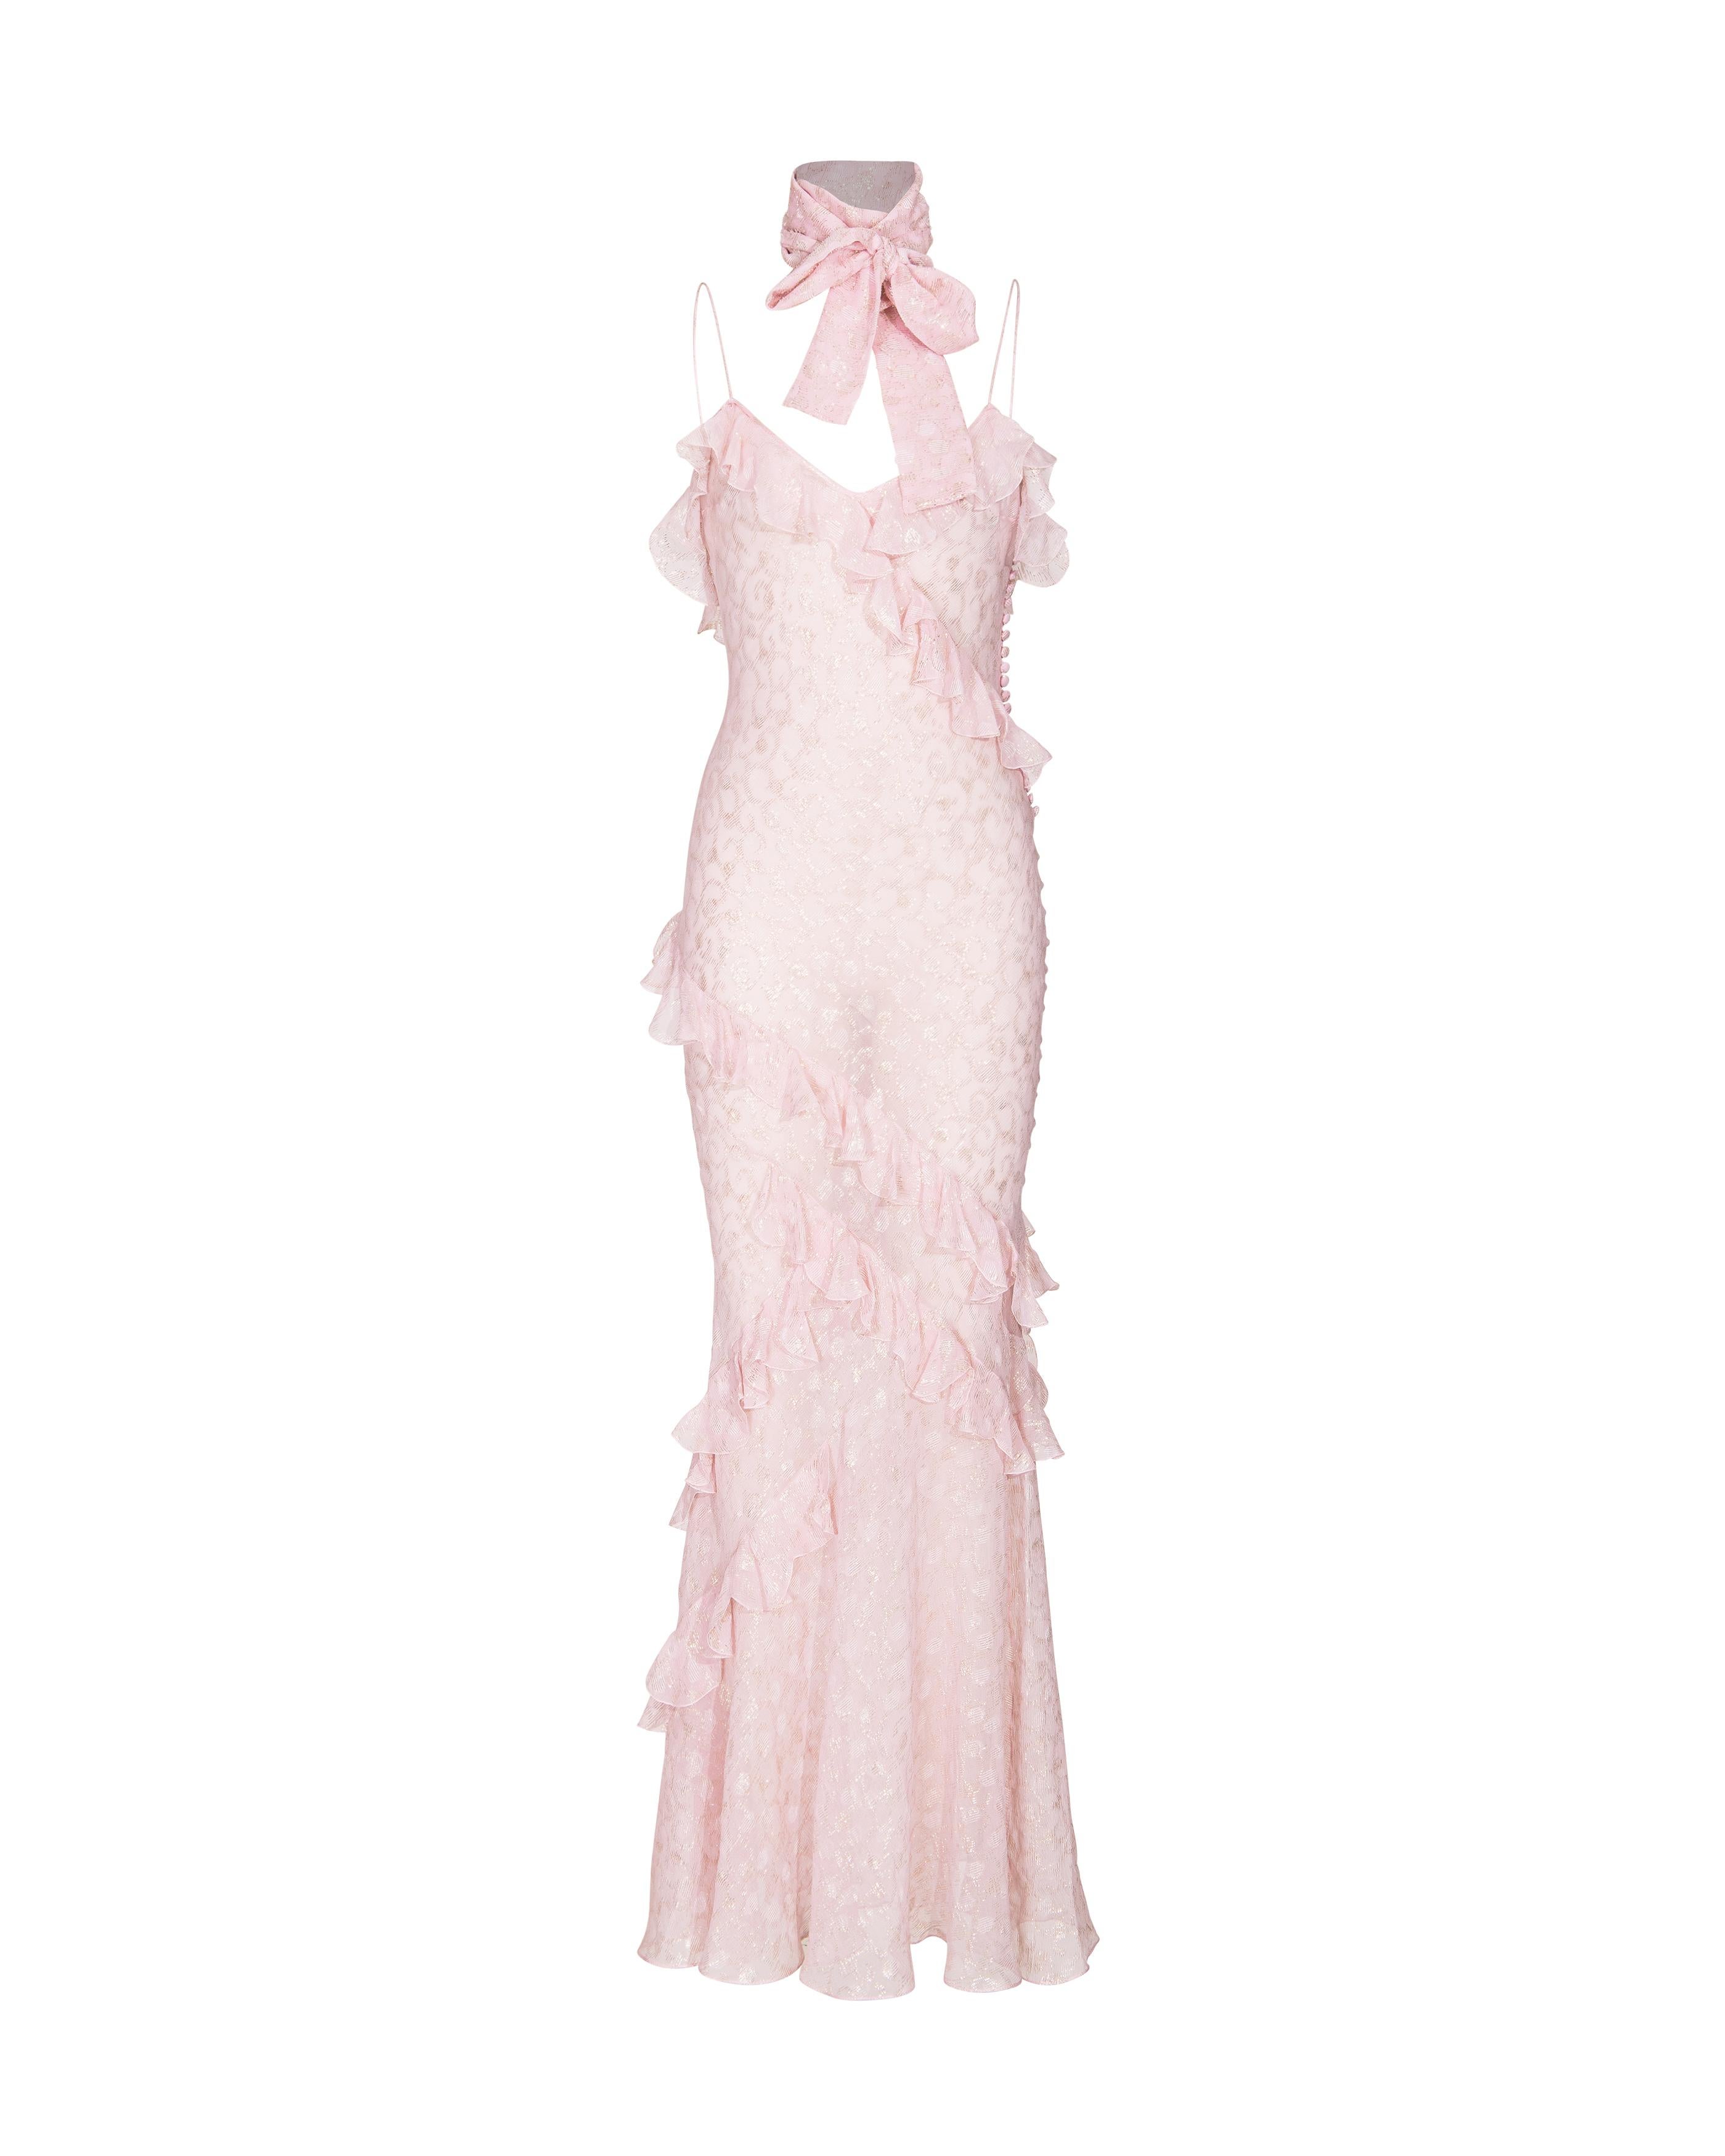 S/S 2004 Christian Dior by John Galliano Sheer Pink and Gold Ruffle Gown 9